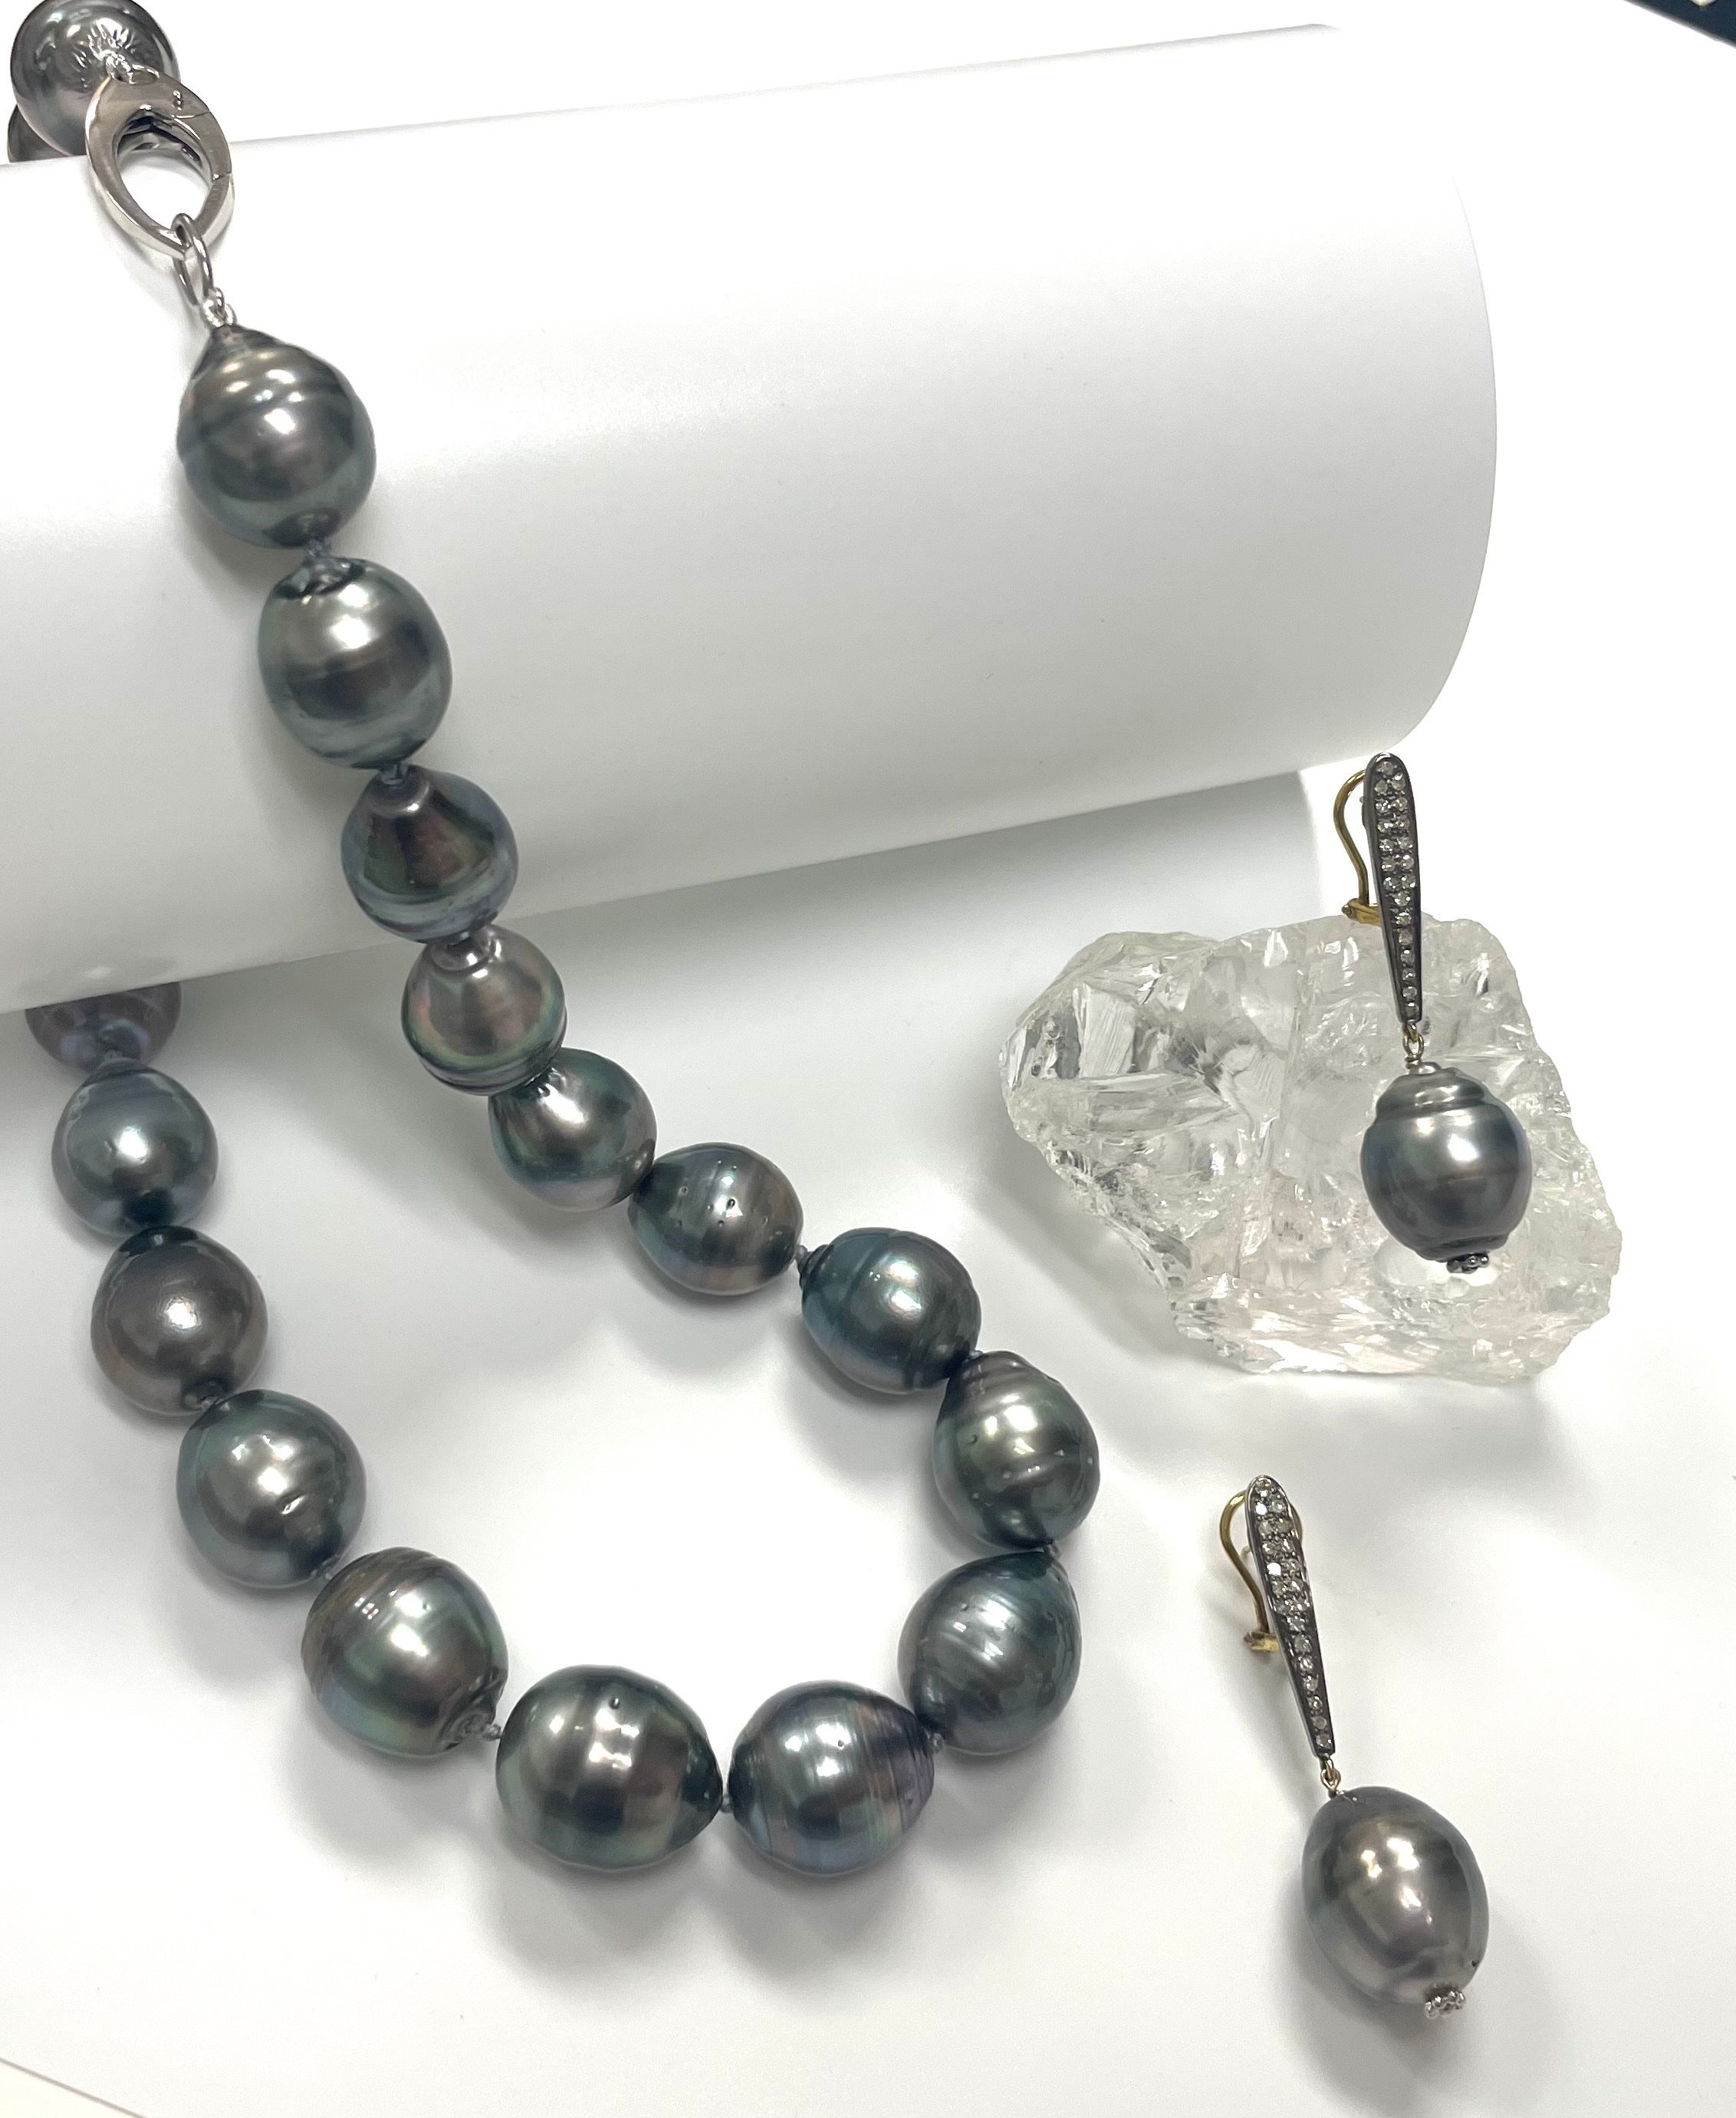 Description
The absolutely beautiful color, variety of hues, size and shape of this Tahitian necklace makes an impressive statement.
Item # N3774. Check out matching Earrings Item # E3359 ($4,400; see photo)

Materials and Weight
Tahitian pearls, 18